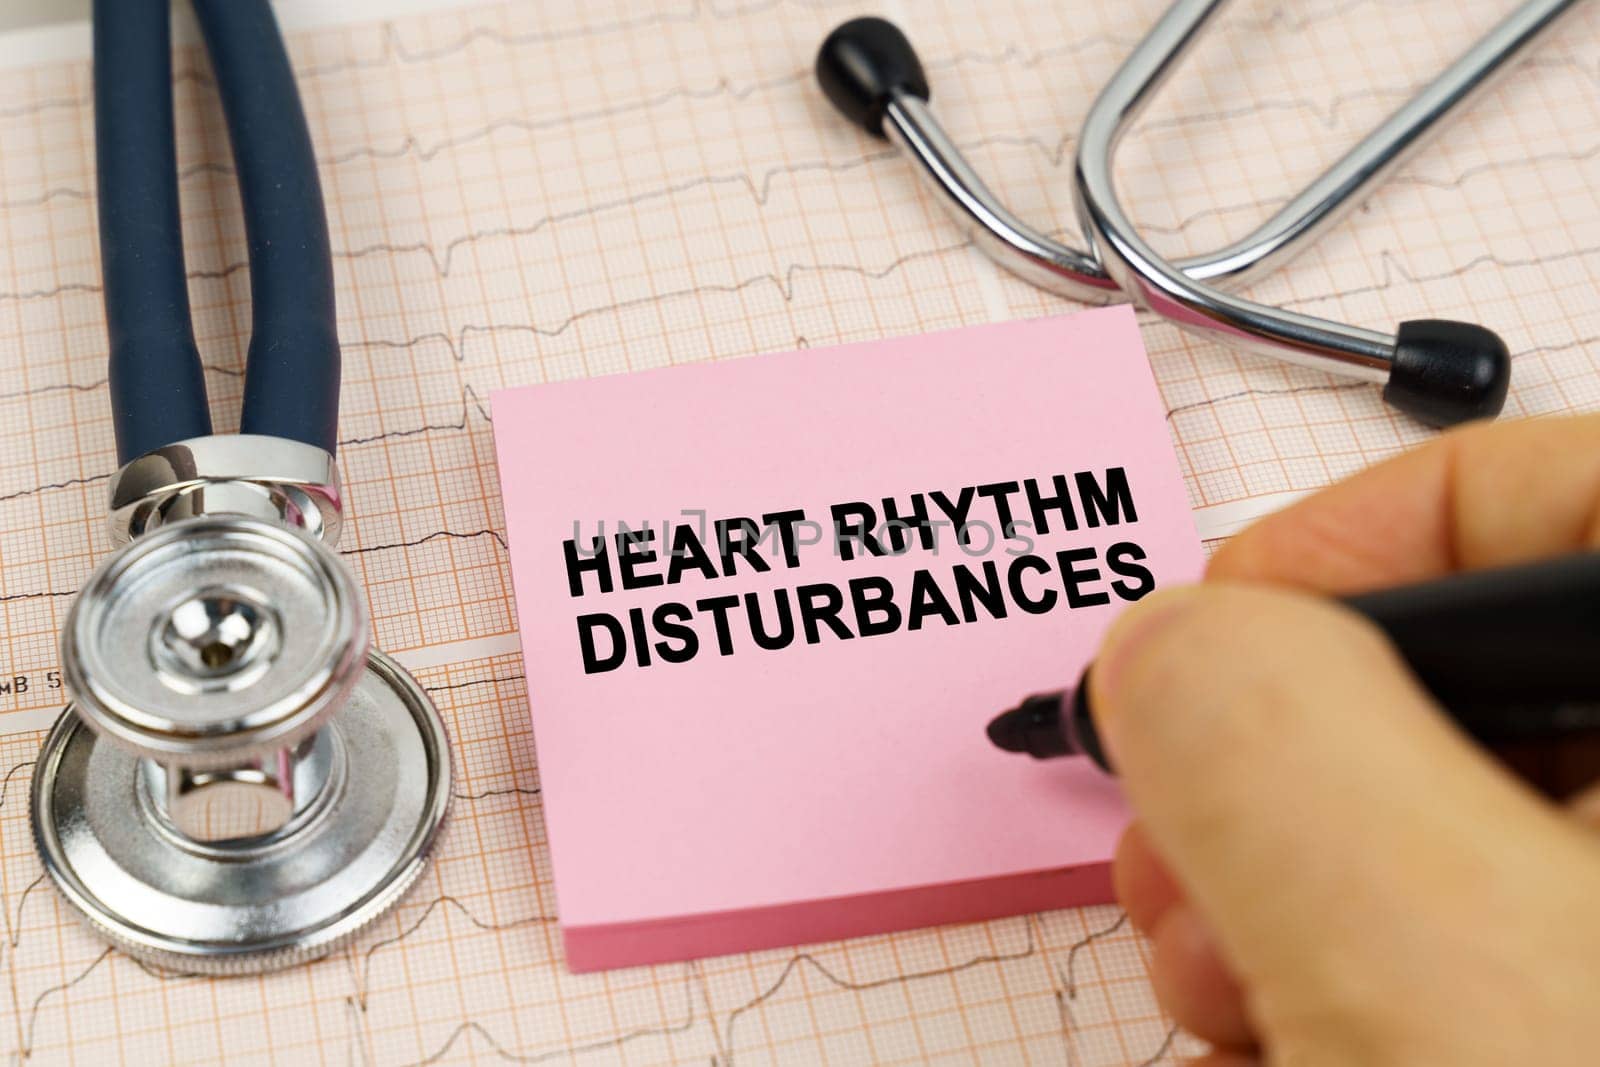 On the cardiograms there is a stethoscope and a sticker with the inscription - Heart rhythm disturbances by Sd28DimoN_1976